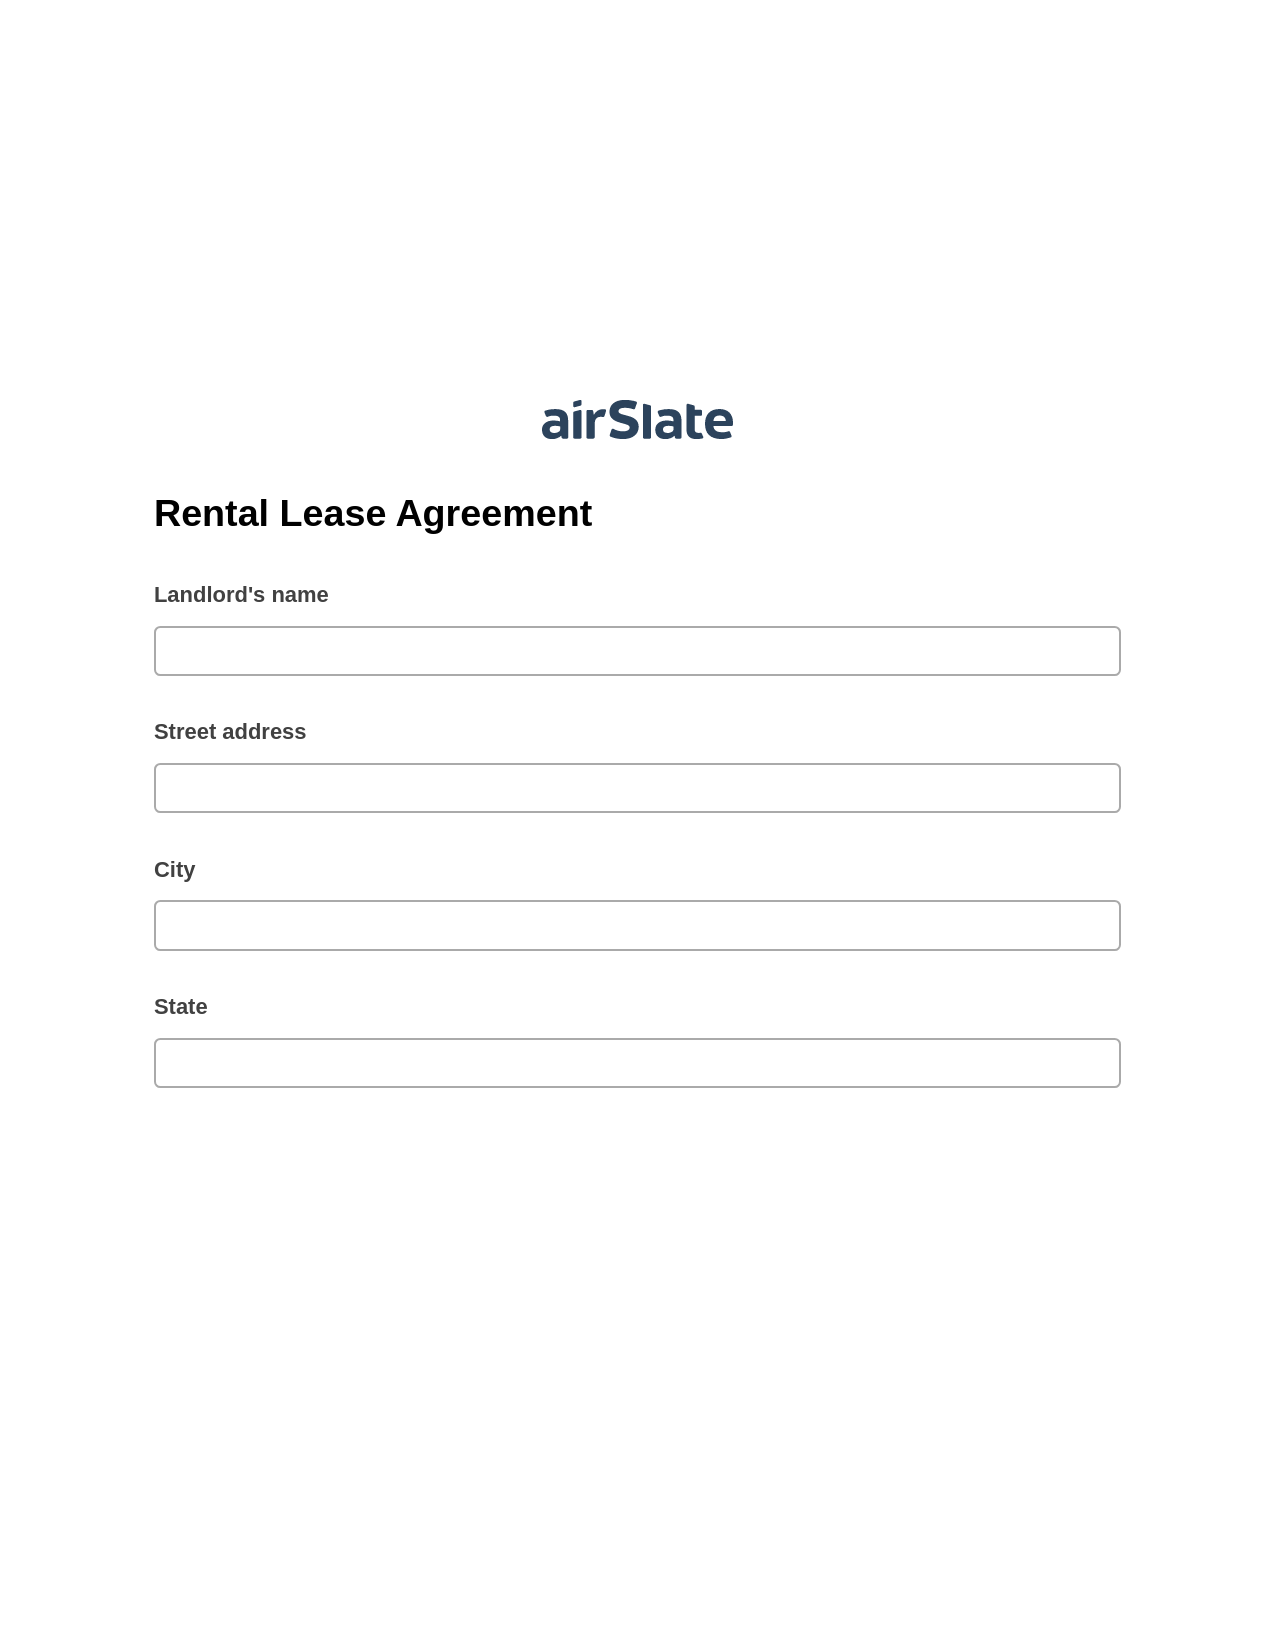 Rental Lease Agreement Pre-fill from NetSuite Records Bot, Pre-fill with Custom Data Bot, Archive to SharePoint Folder Bot